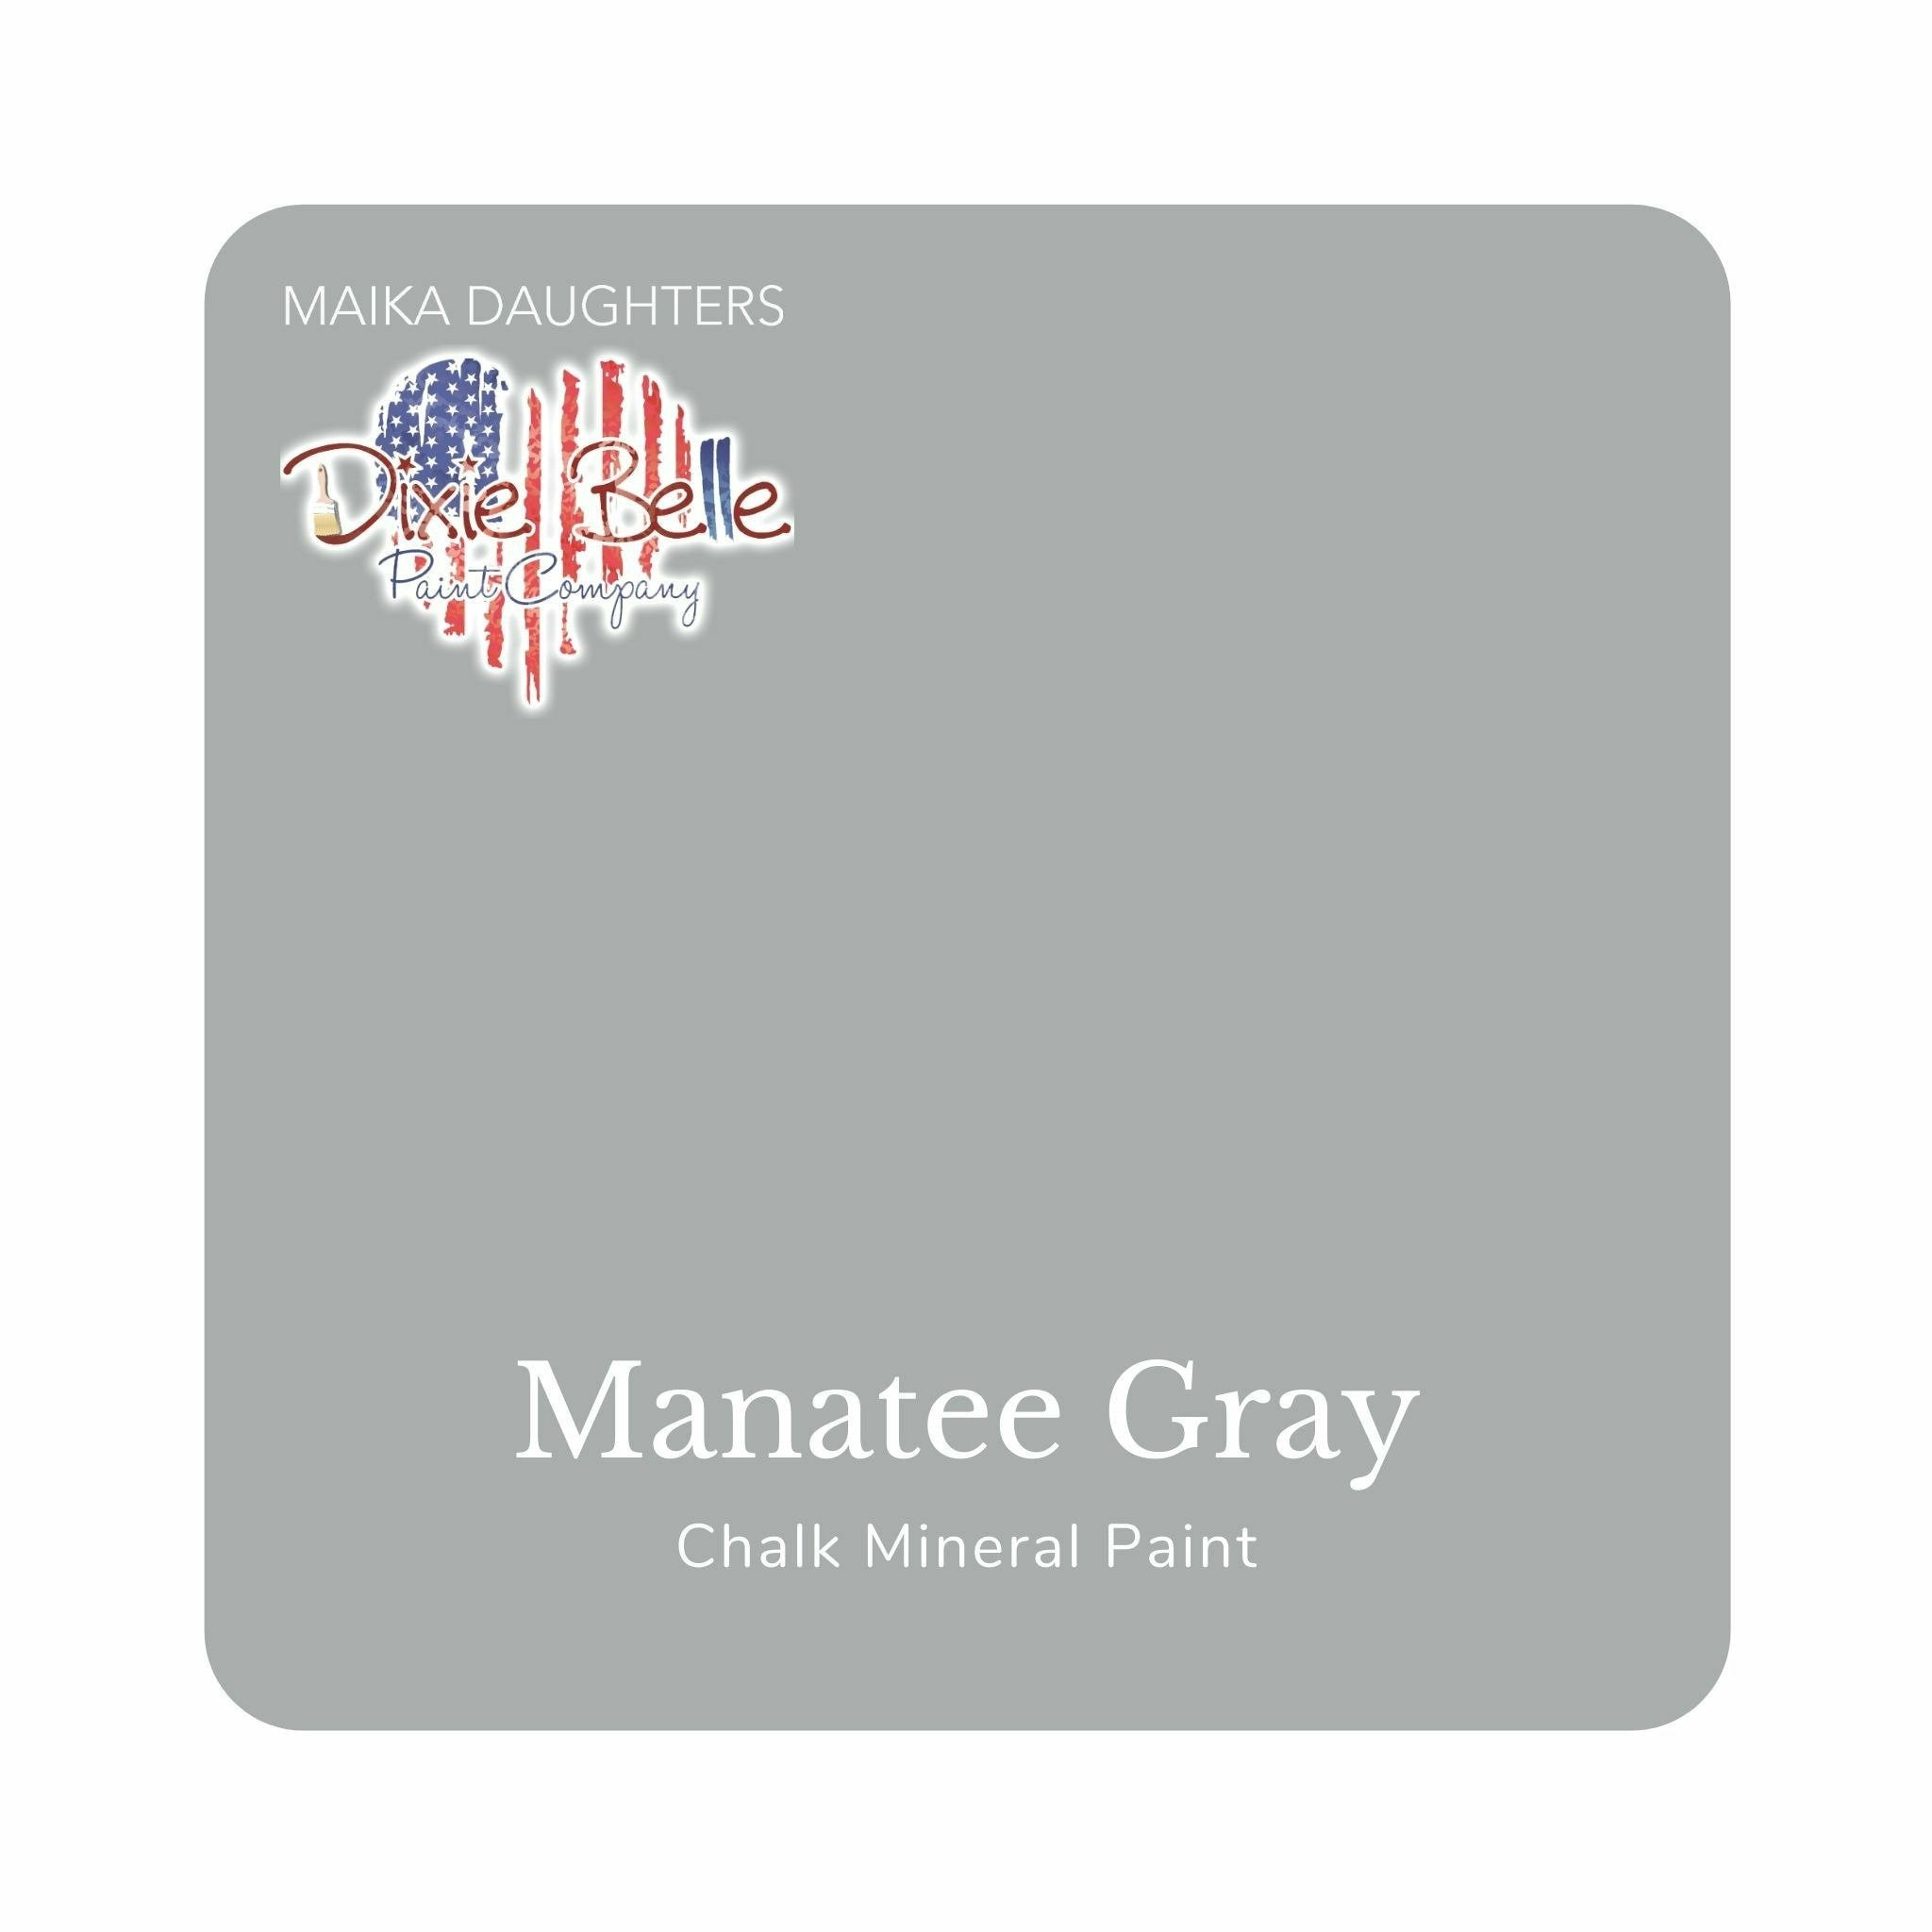 A square swatch card of Dixie Belle Paint Company’s Manatee Gray Chalk Mineral Paint is against a white background. This color is a light cool gray